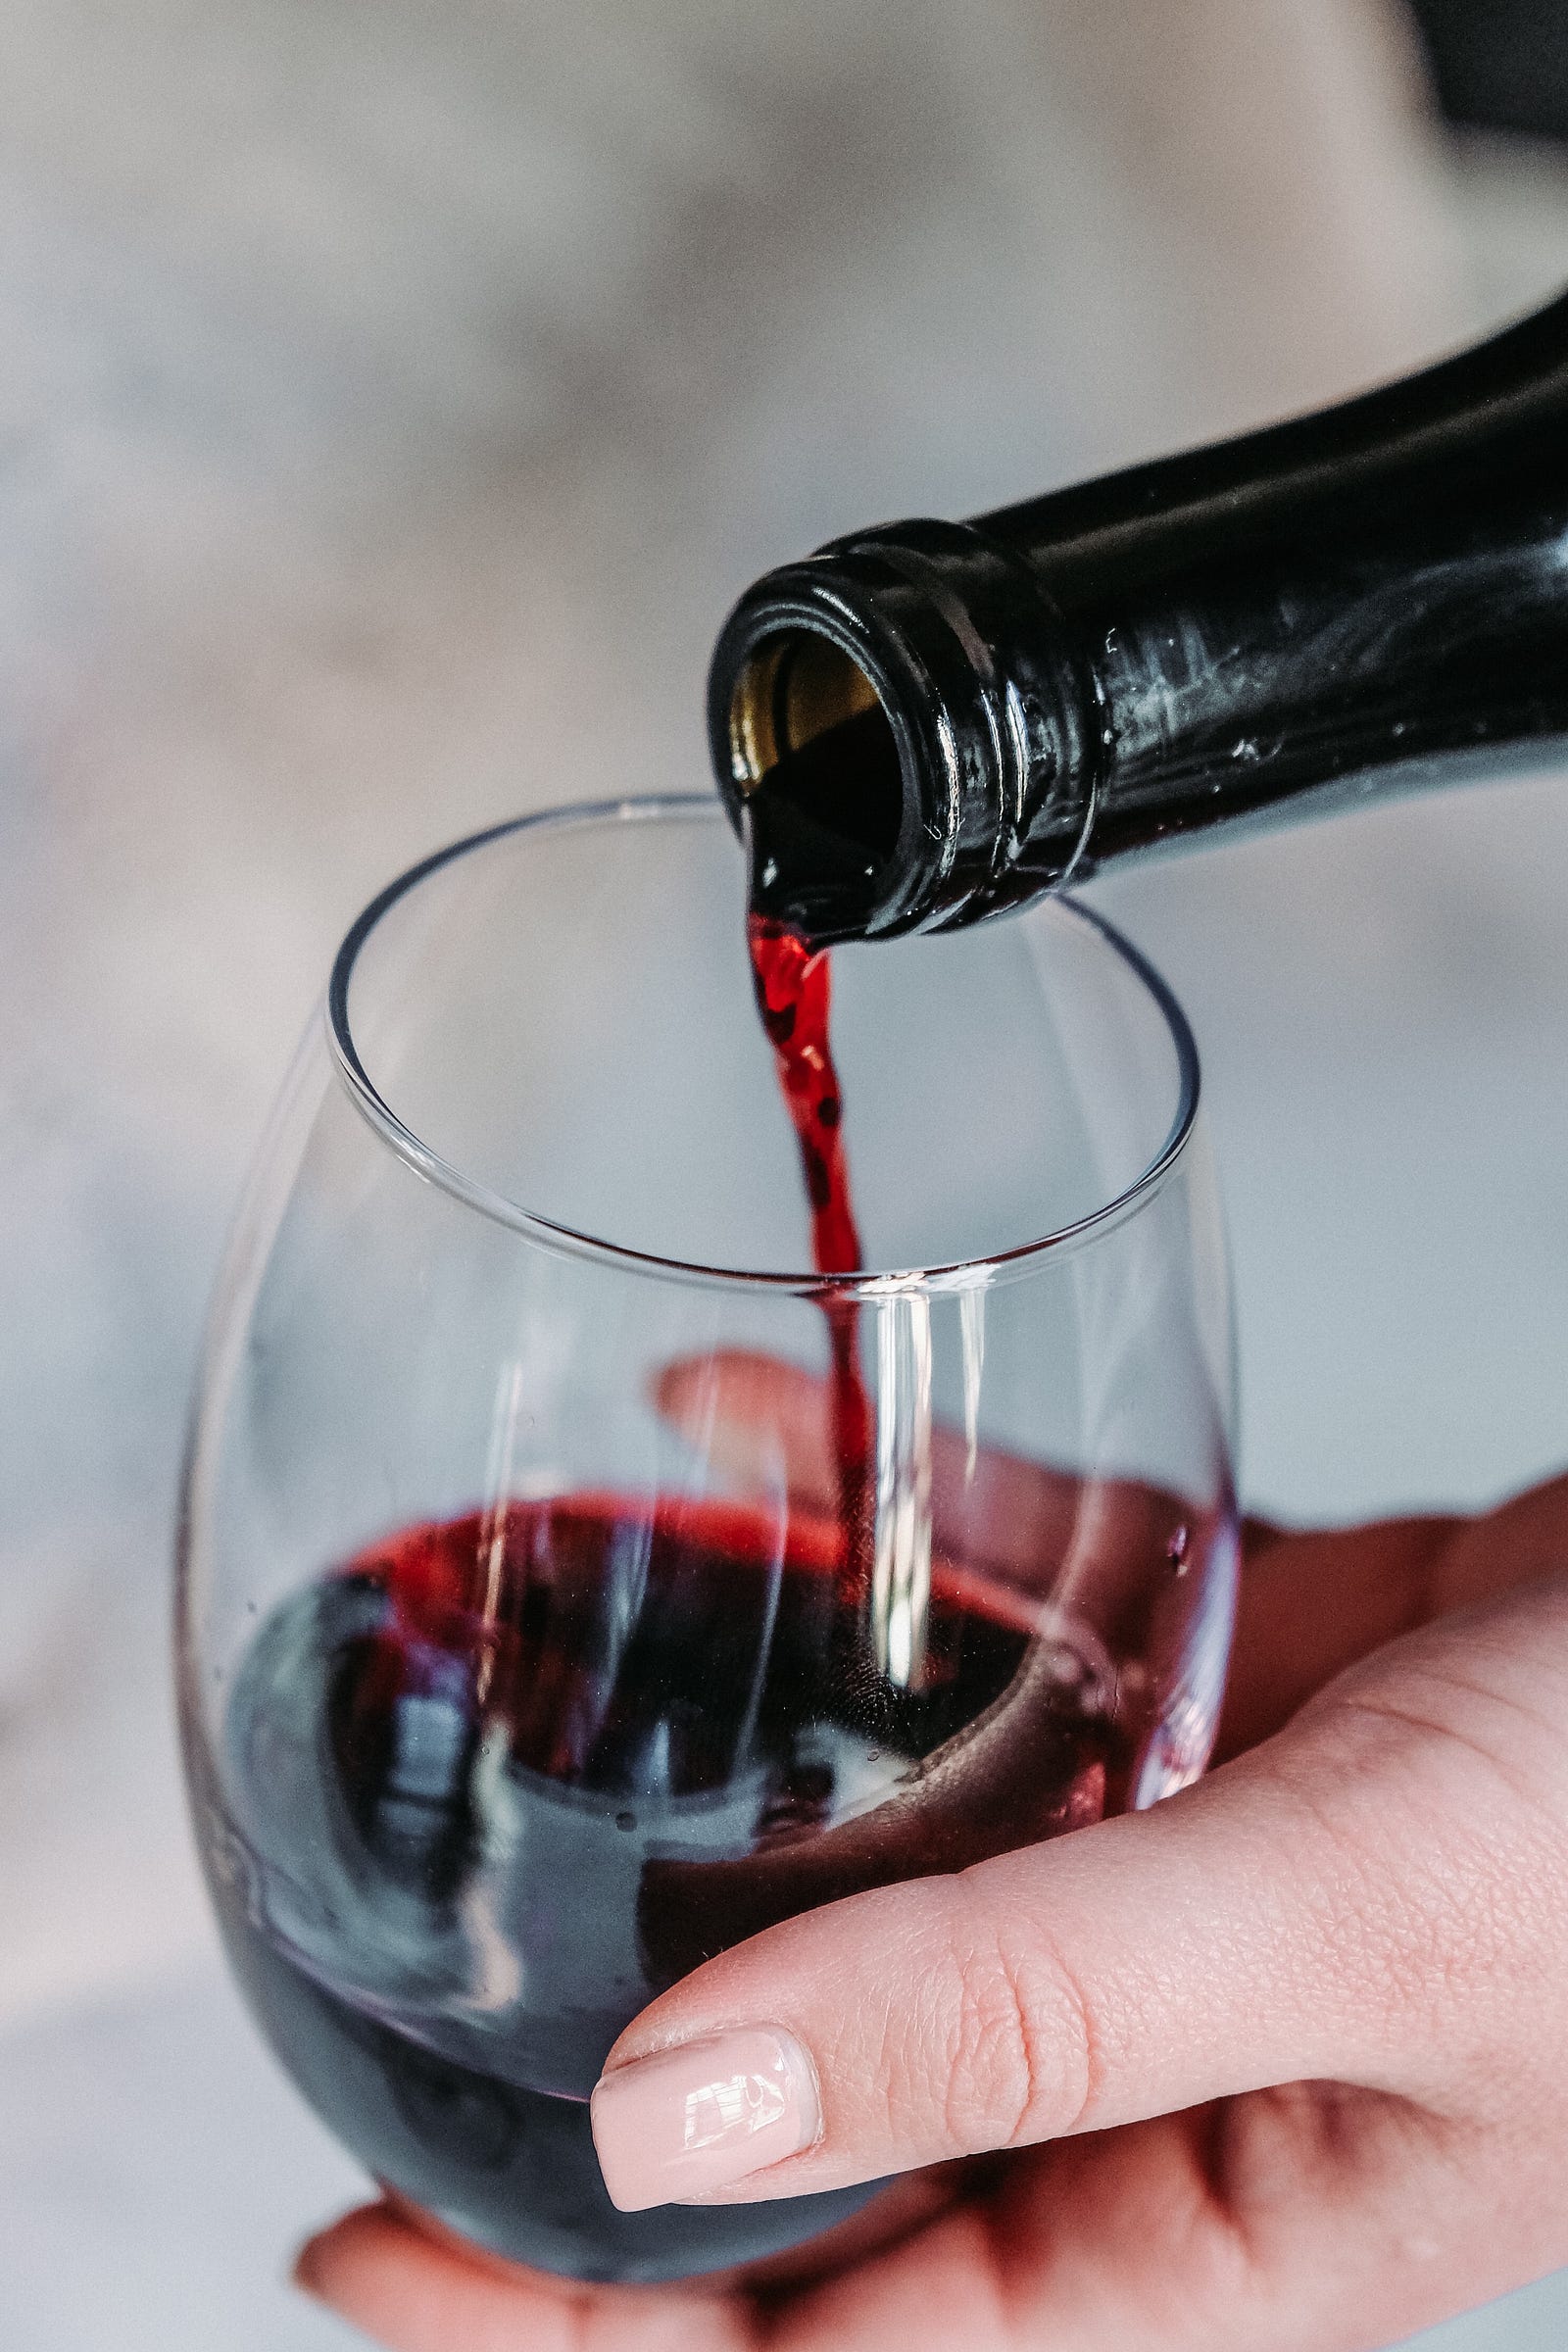 A bottle extends, from the upper right of the image, to pour red wine into a glass. Antioxidants (polyphenols) in red wine may help protect the lining of blood vessels in the heart. The polyphenol resveratrol is one part of red wine that’s been noted to be health-promoting.